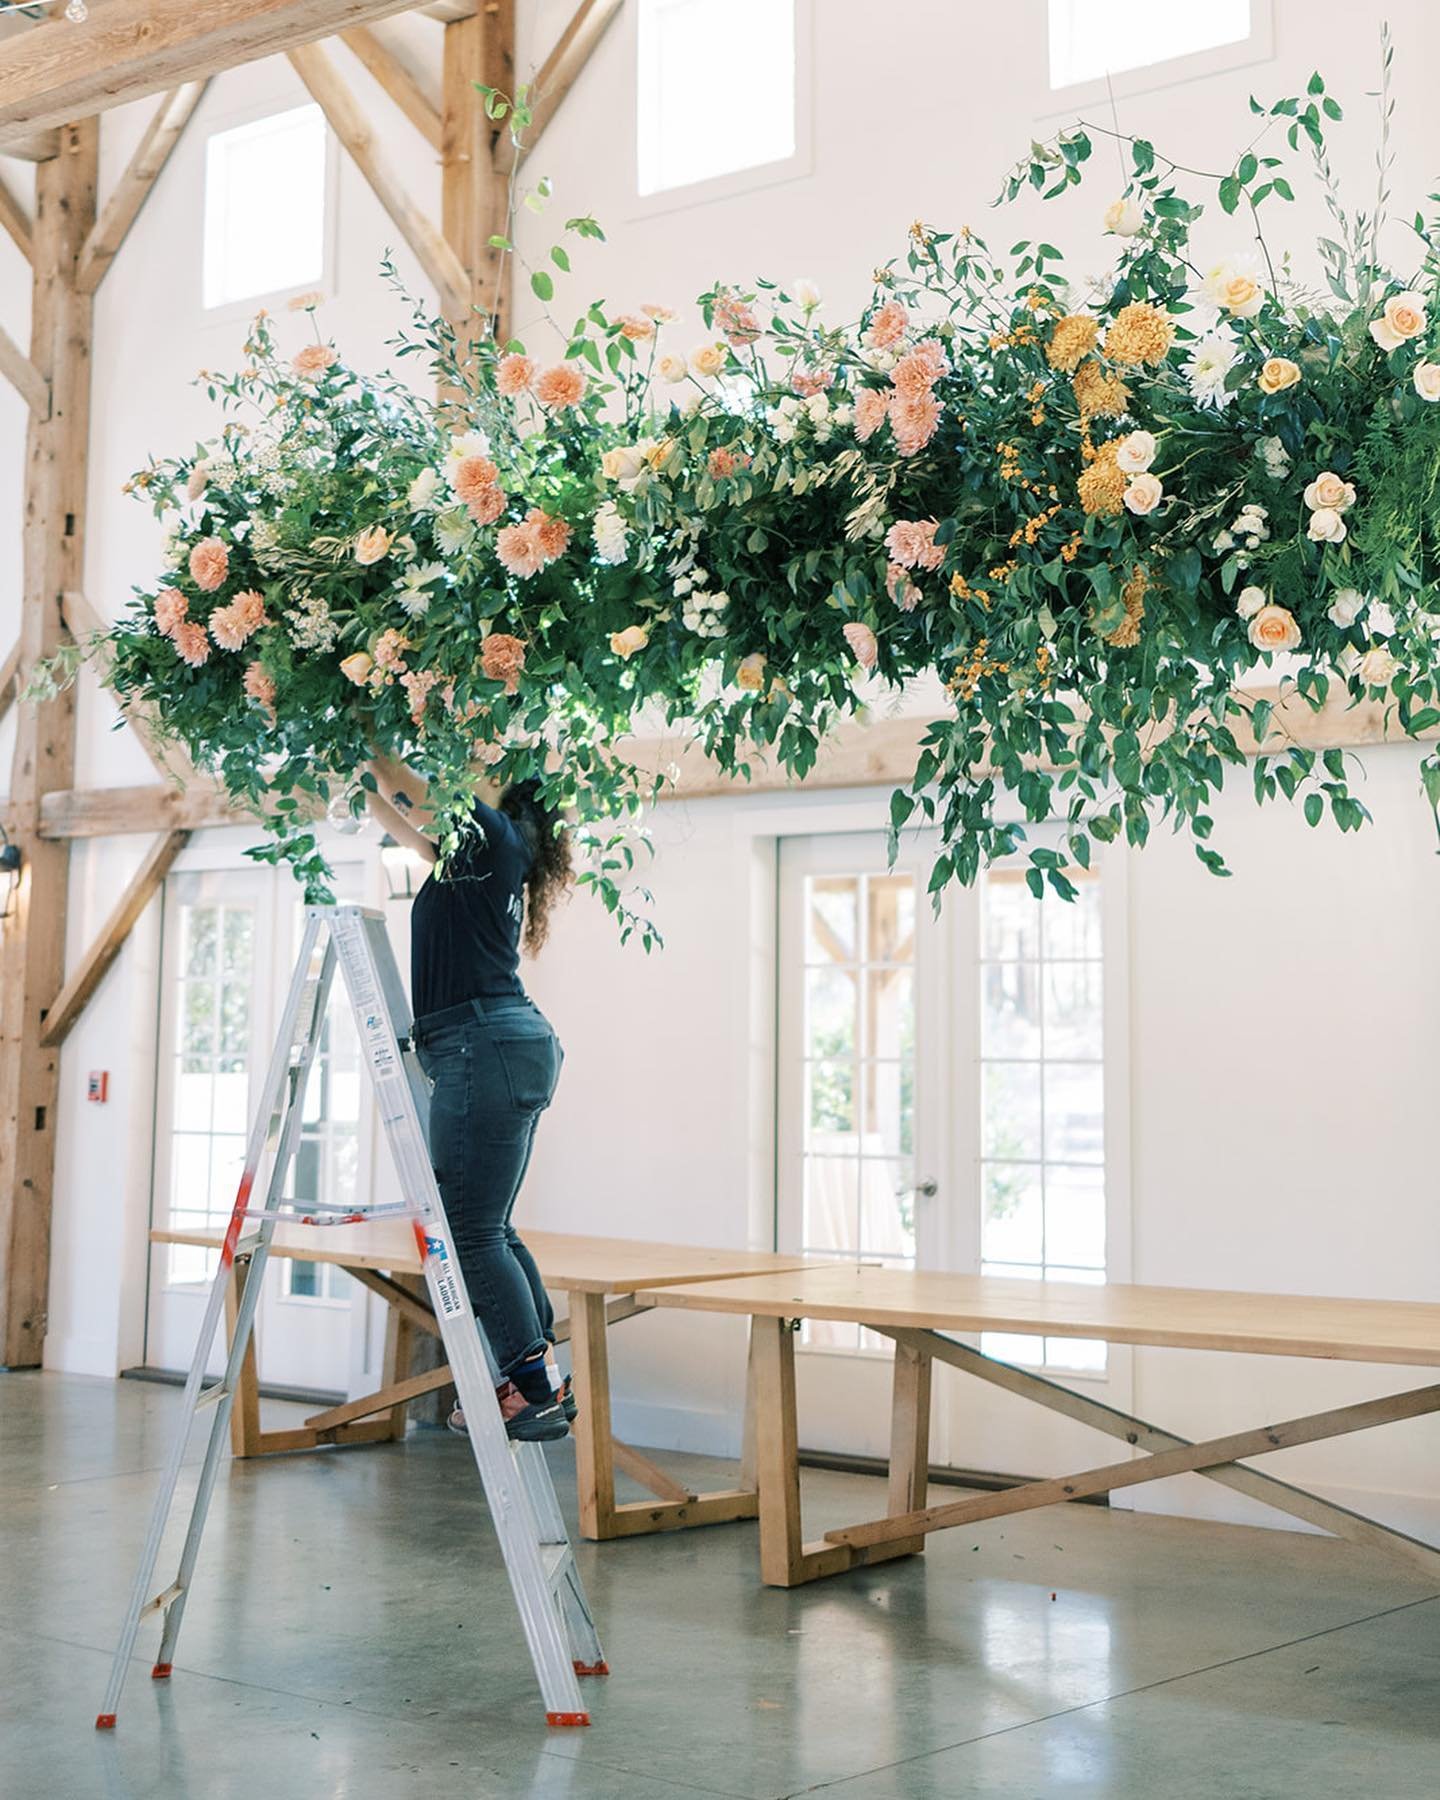 A little behind the scenes of us making your wedding day flowers absolutely perfect 🌸
I love these types of photos because it helps us remember that there is beauty in the process. 

Photo 1 @javarosephotography 
Photos 2 and 3 @raemarshall